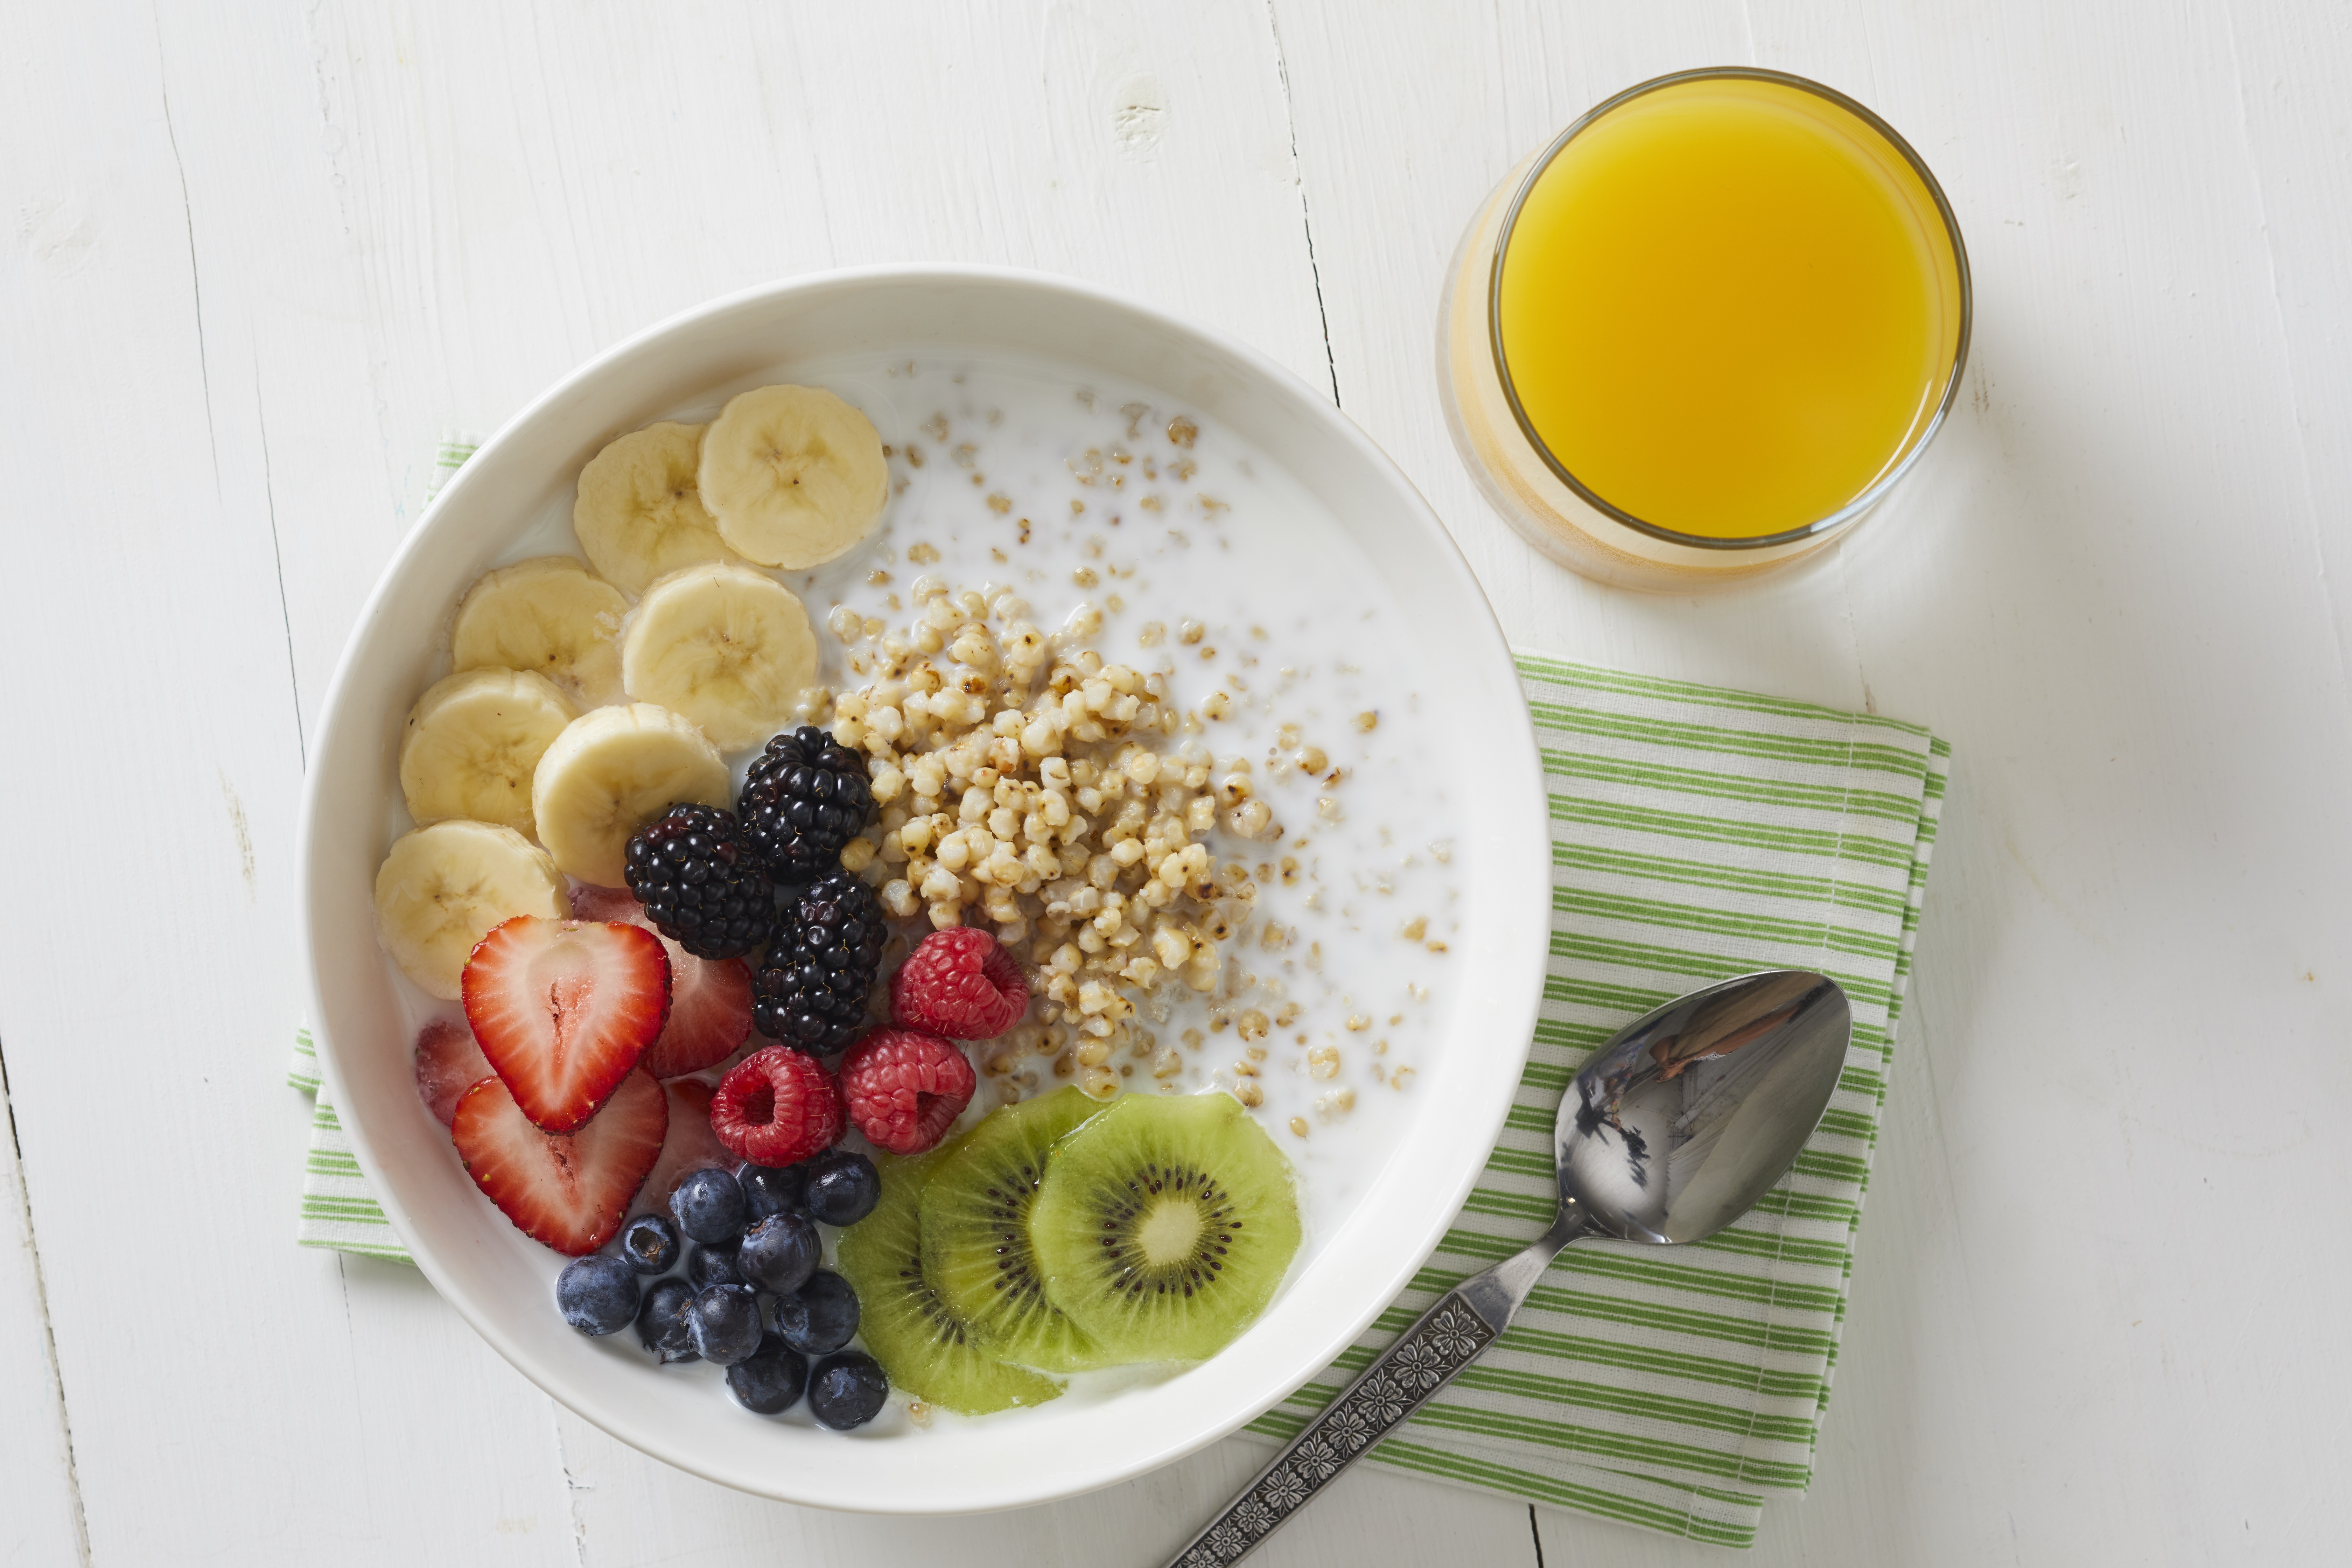 A bowl of cooked sorghum grain with milk, topped with bananas, strawberries, kiwi, and bluberries on a table with orange juice and a spoon on a green napkin